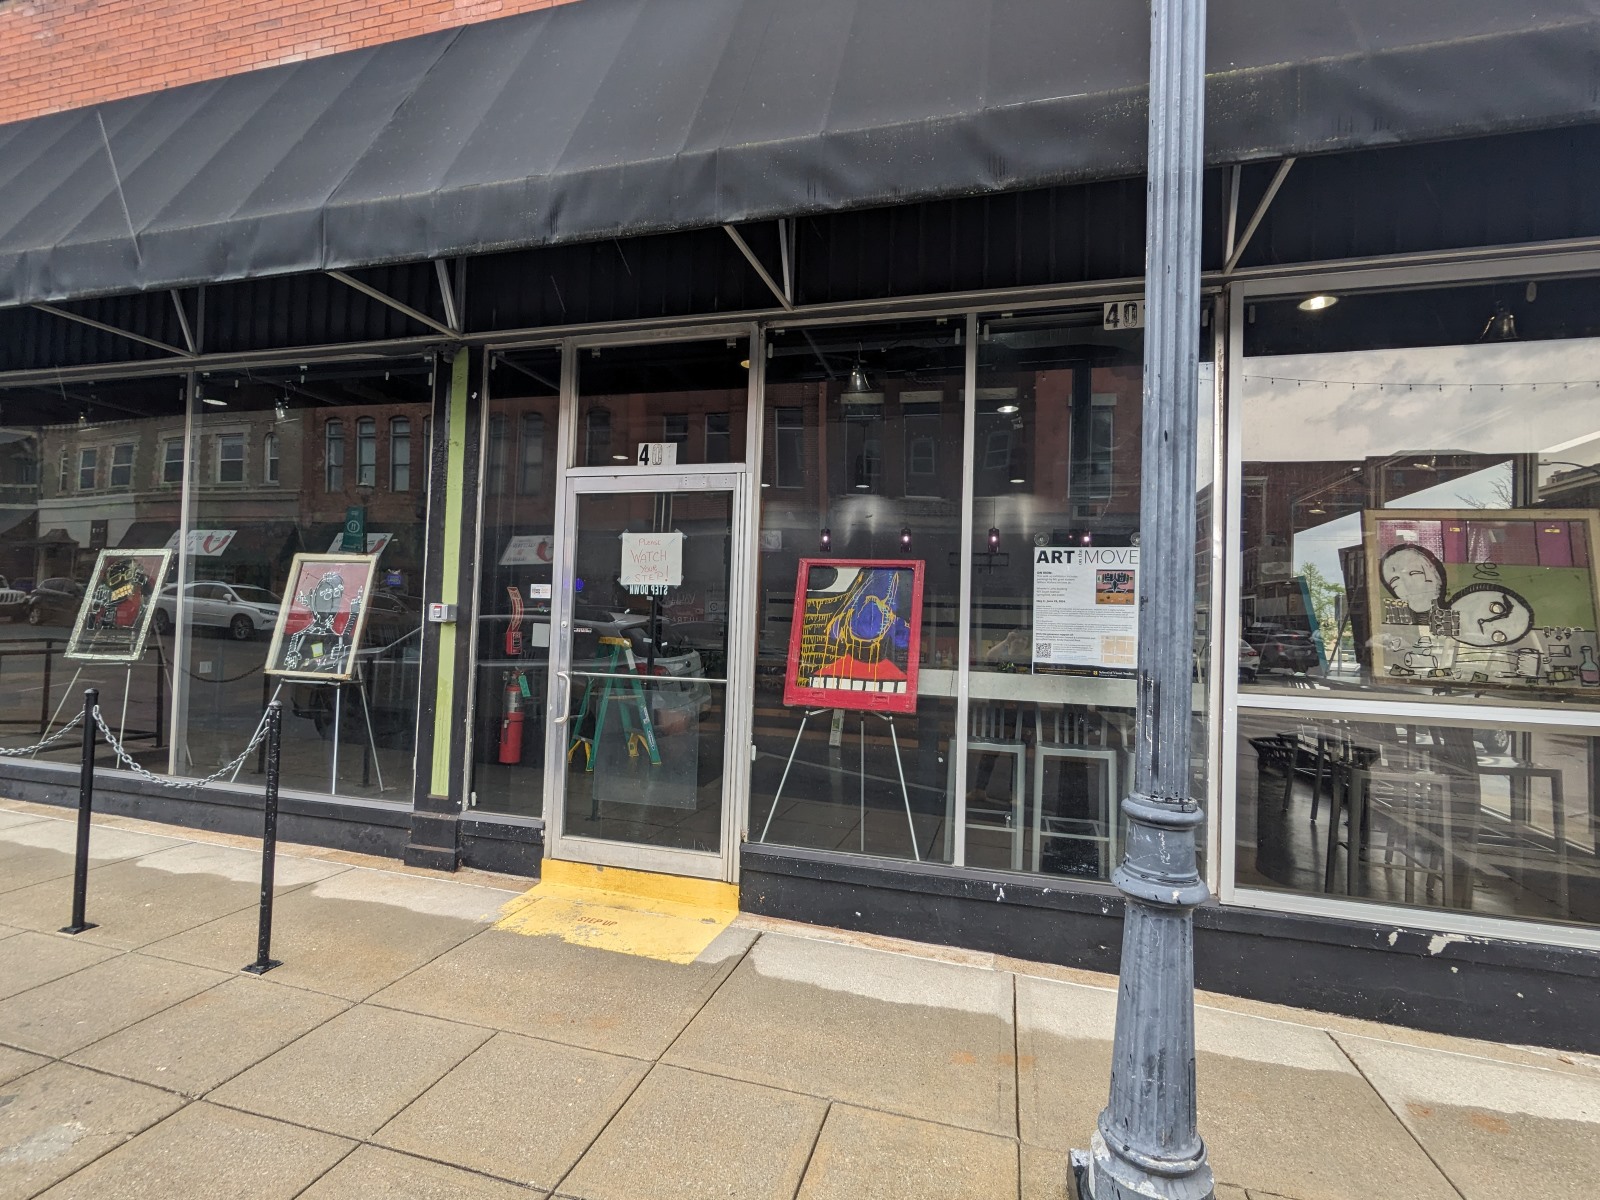 Art by William Wallace is displayed in the windows of the Wheelers Lofts building in downtown Springfield, Missouri.